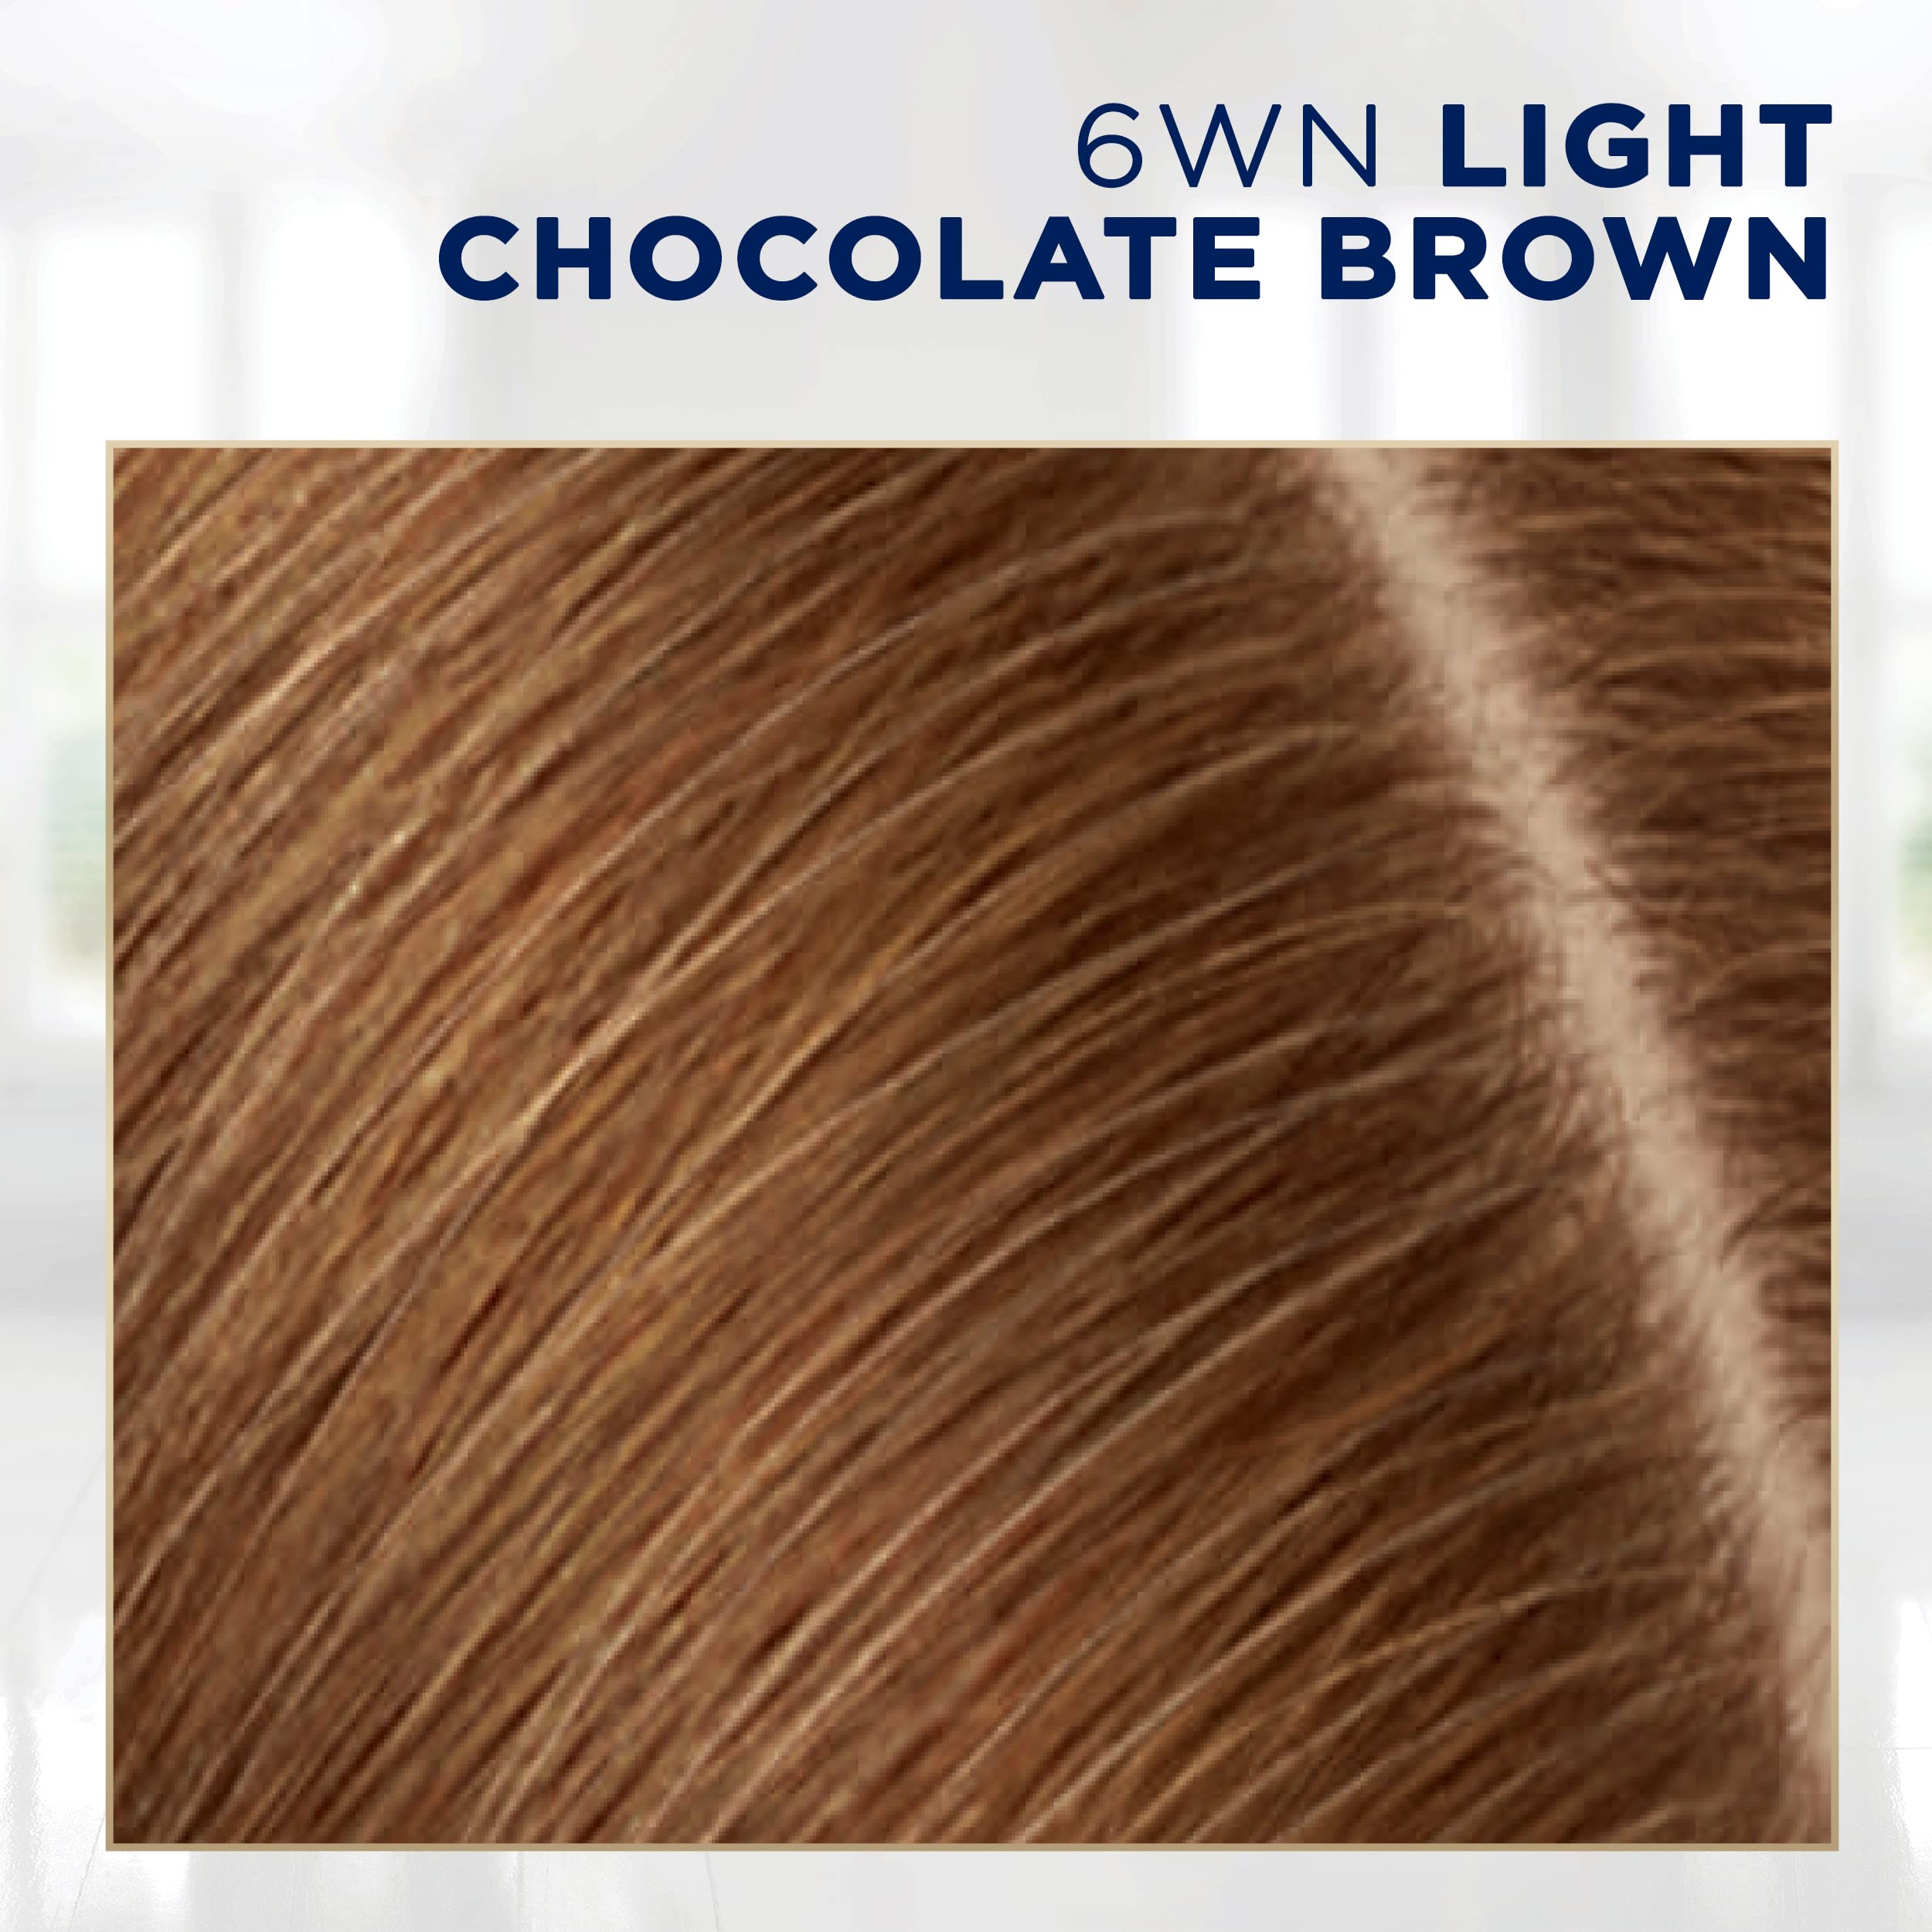 Clairol Root Touch-Up by Nice'n Easy Permanent Hair Dye, 6WN Light Chocolate Brown Hair Color, Pack of 1